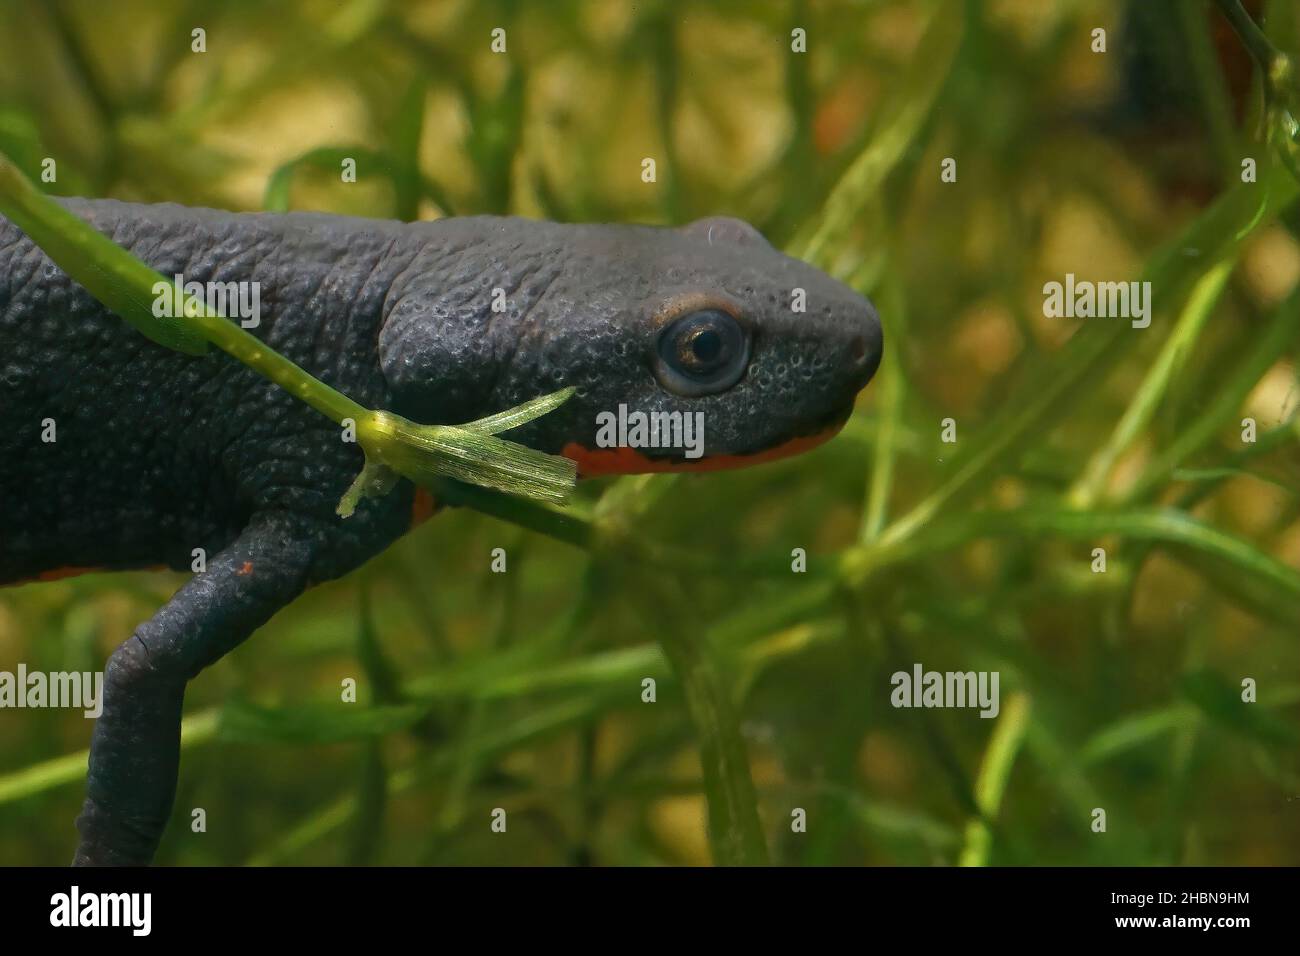 Closeup on the head of a black female Chinese firebelied newt, Cynops orientalis, underwater Stock Photo